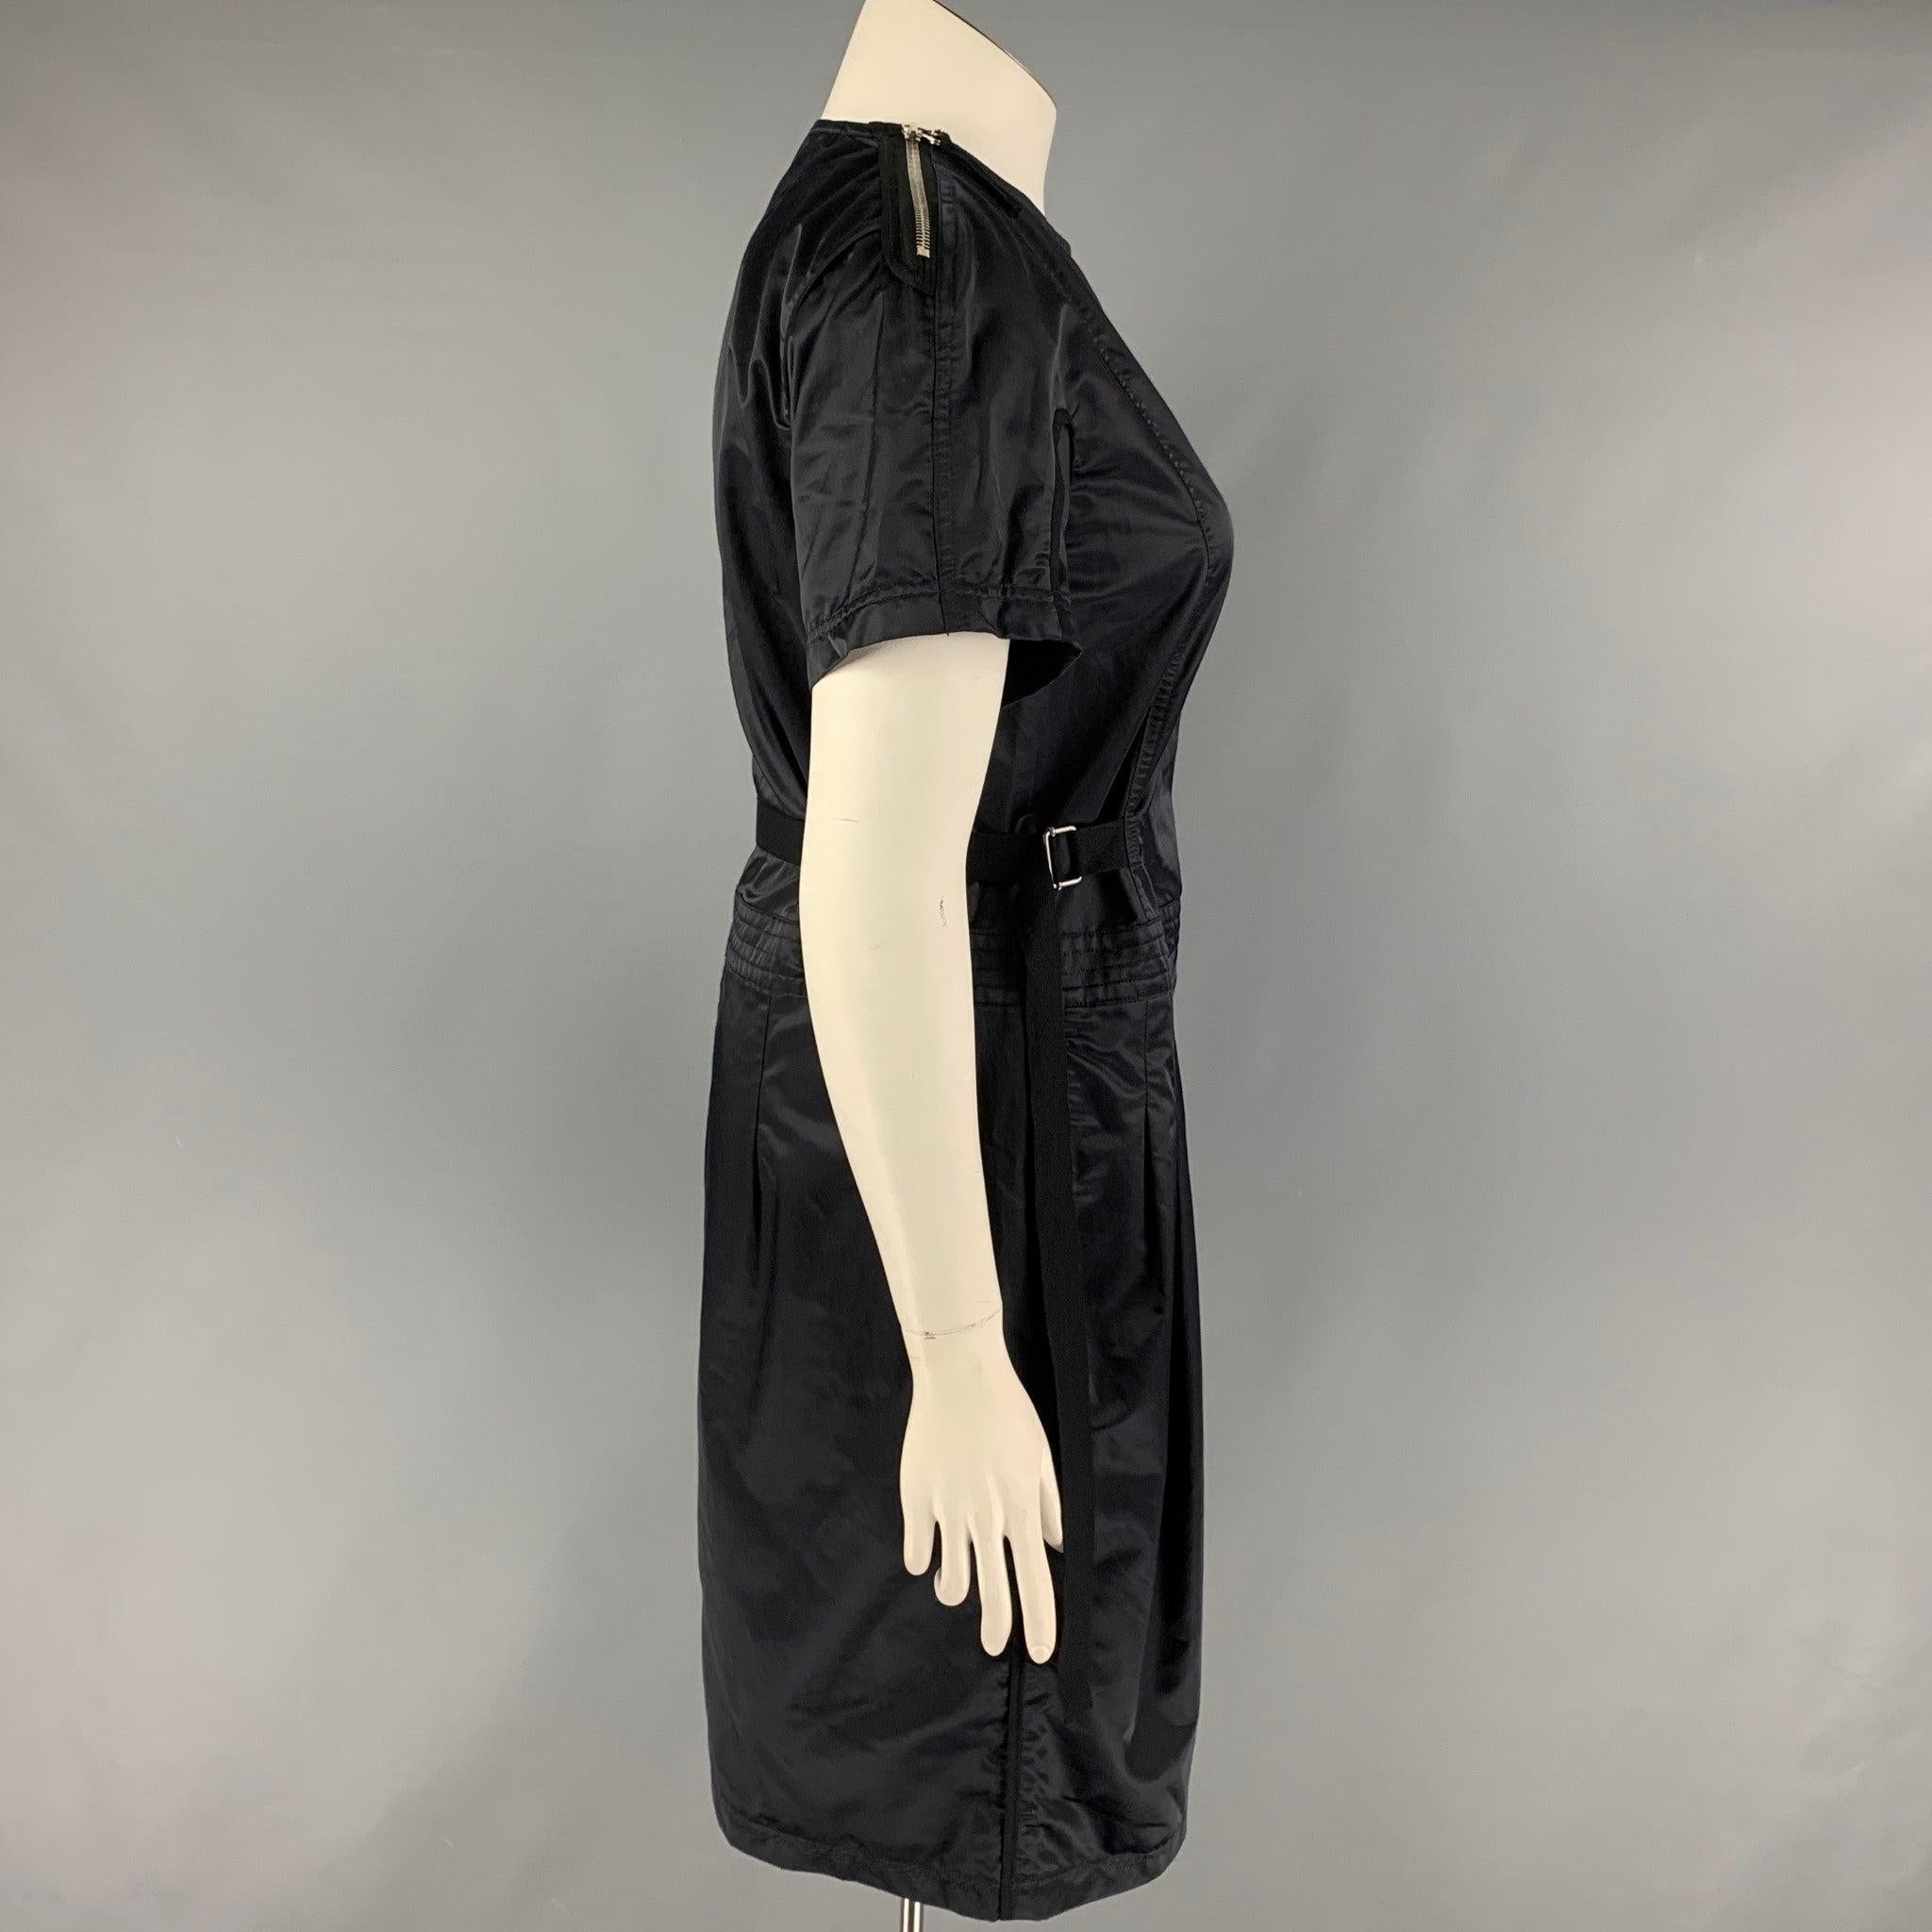 Vintage DRIES VAN NOTEN dress comes in a navy blue cotton featuring a adjustable waist, short sleeves, and a shoulder zip up closure.
Very Good
Pre-Owned Condition. 

Marked:   42 

Measurements: 
 
Shoulder: 17 inches  Bust: 38 inches  Waist: 38